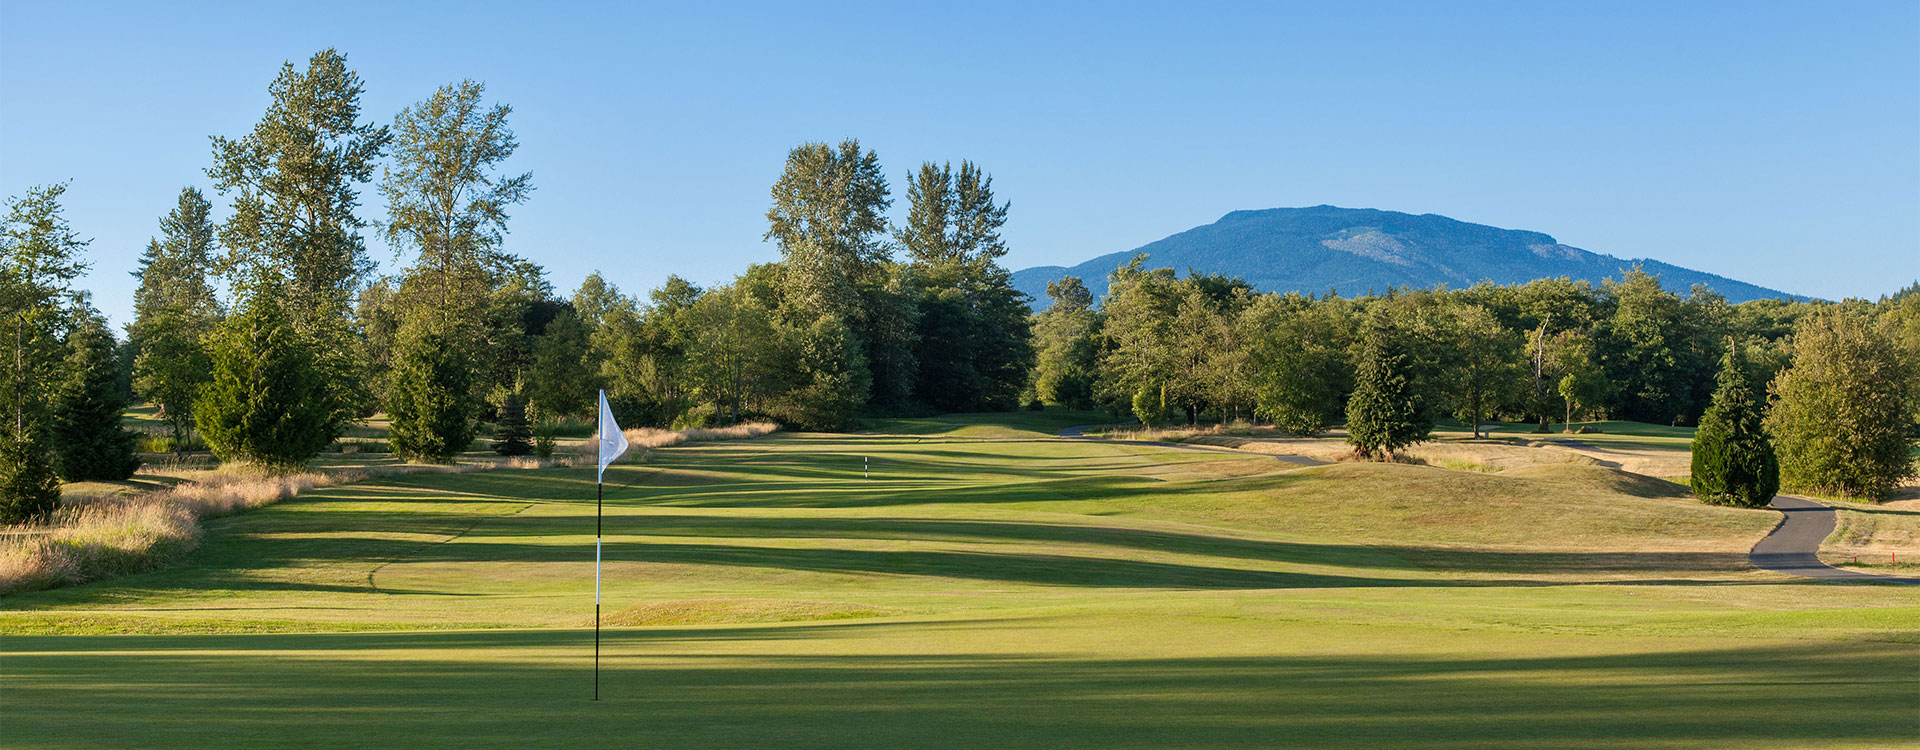 mount vernon country club membership cost